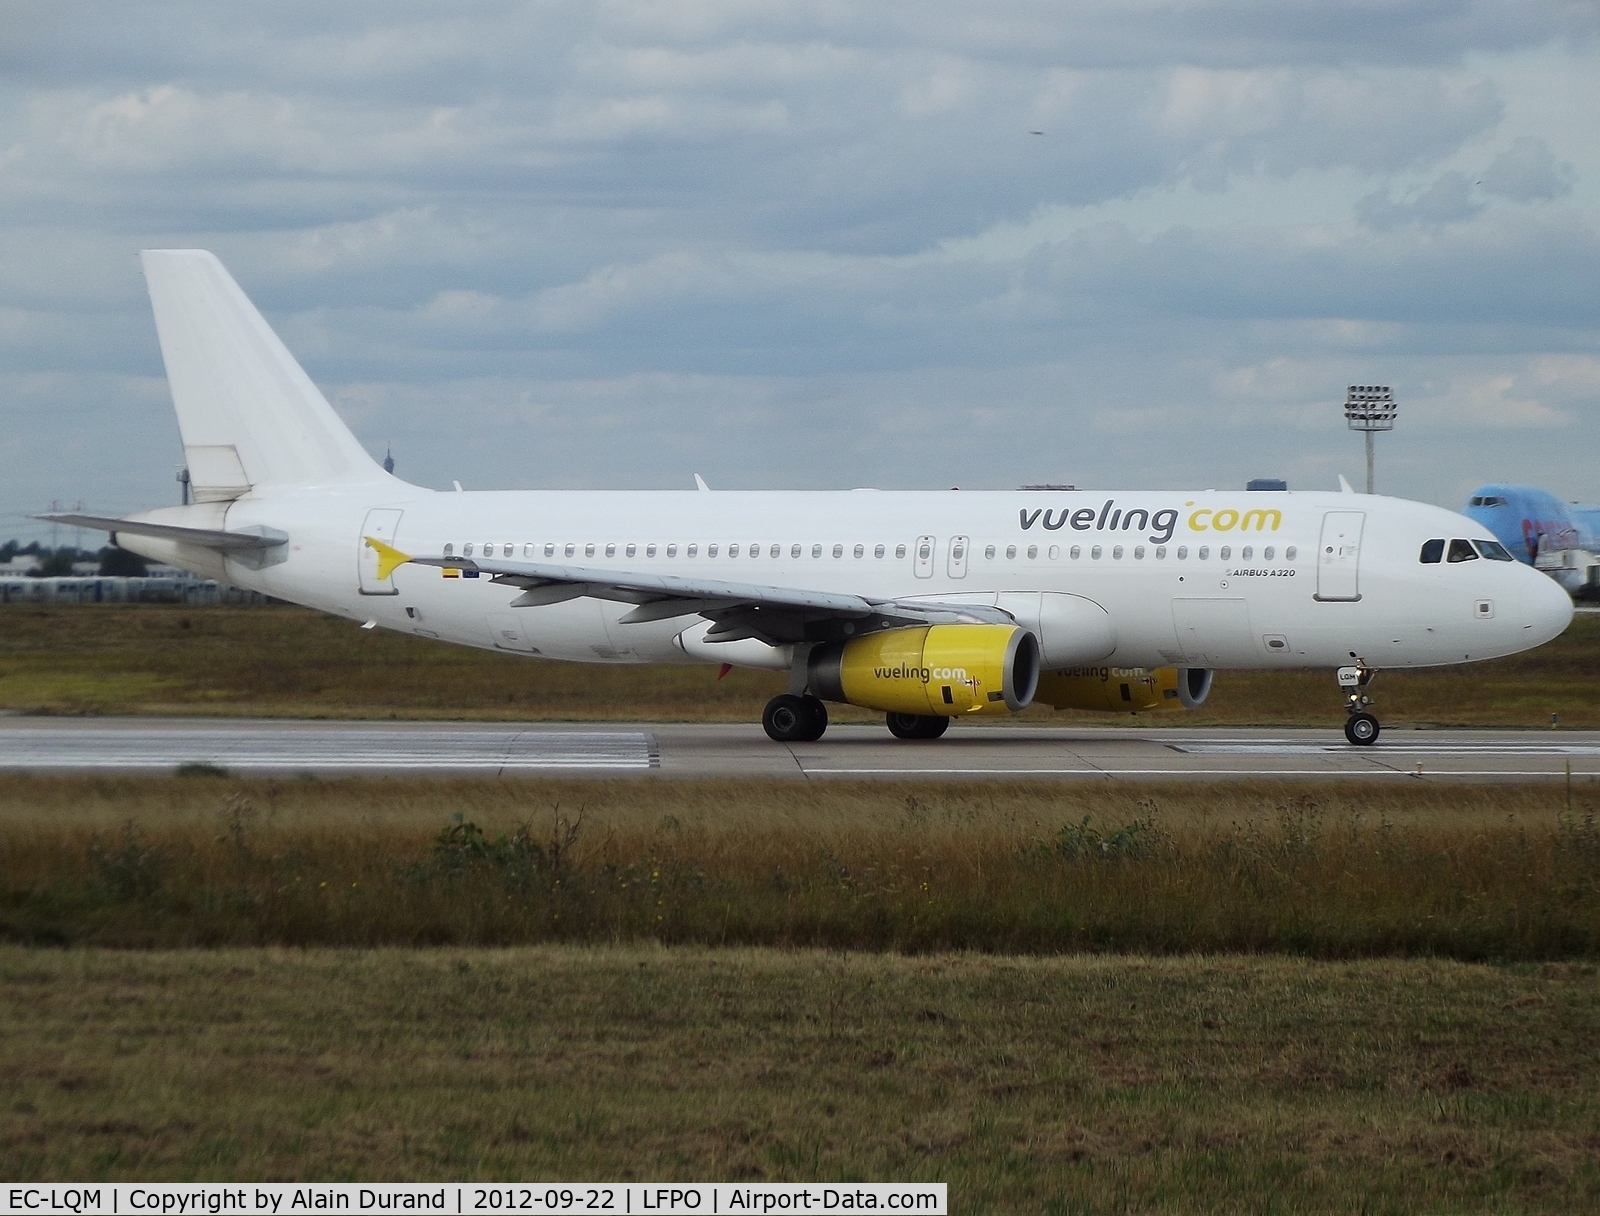 EC-LQM, 2004 Airbus A320-232 C/N 2223, Posing as Vueling's most unsual fleet member, IAE 2500 powered EC-LQM first served Spanair as EC-IZK from 2004 until January 2012. ILFC placed the 